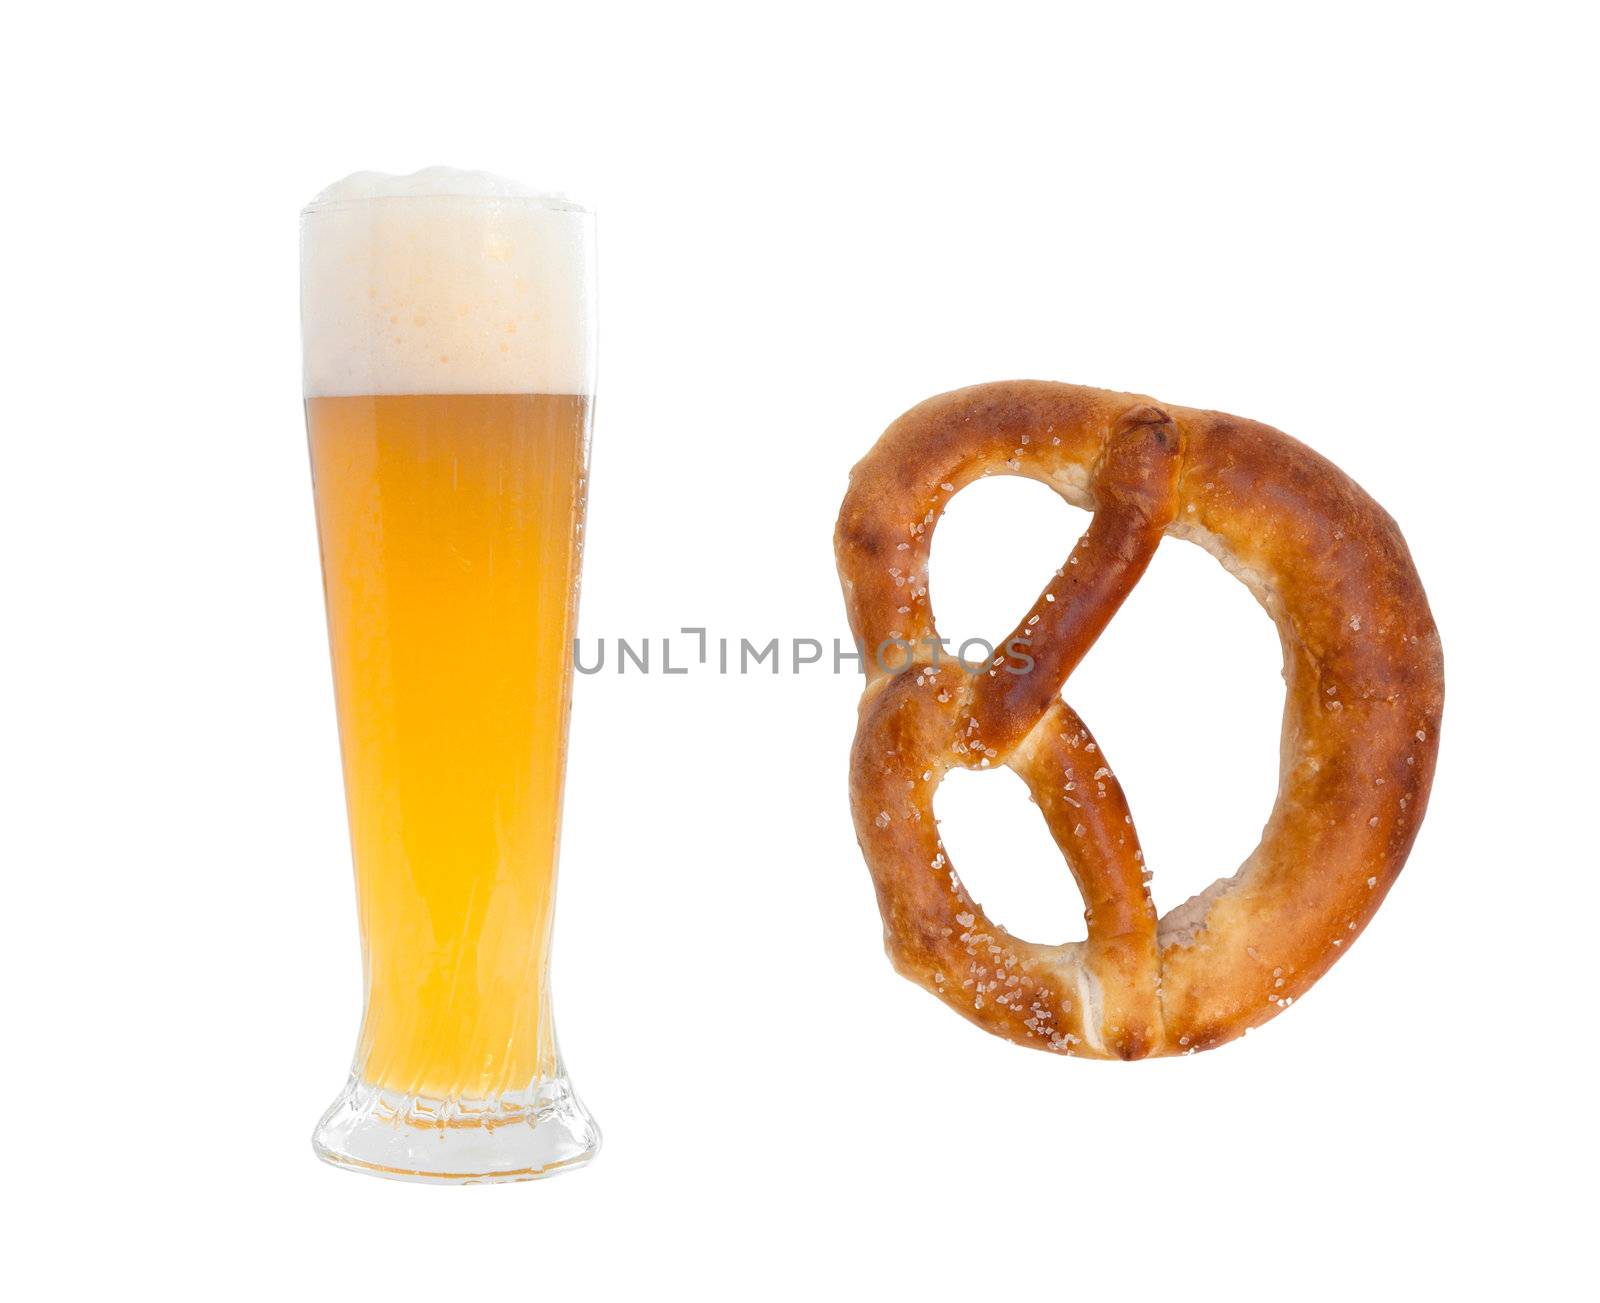 Isolated wheat beer glass and pretzel on white background